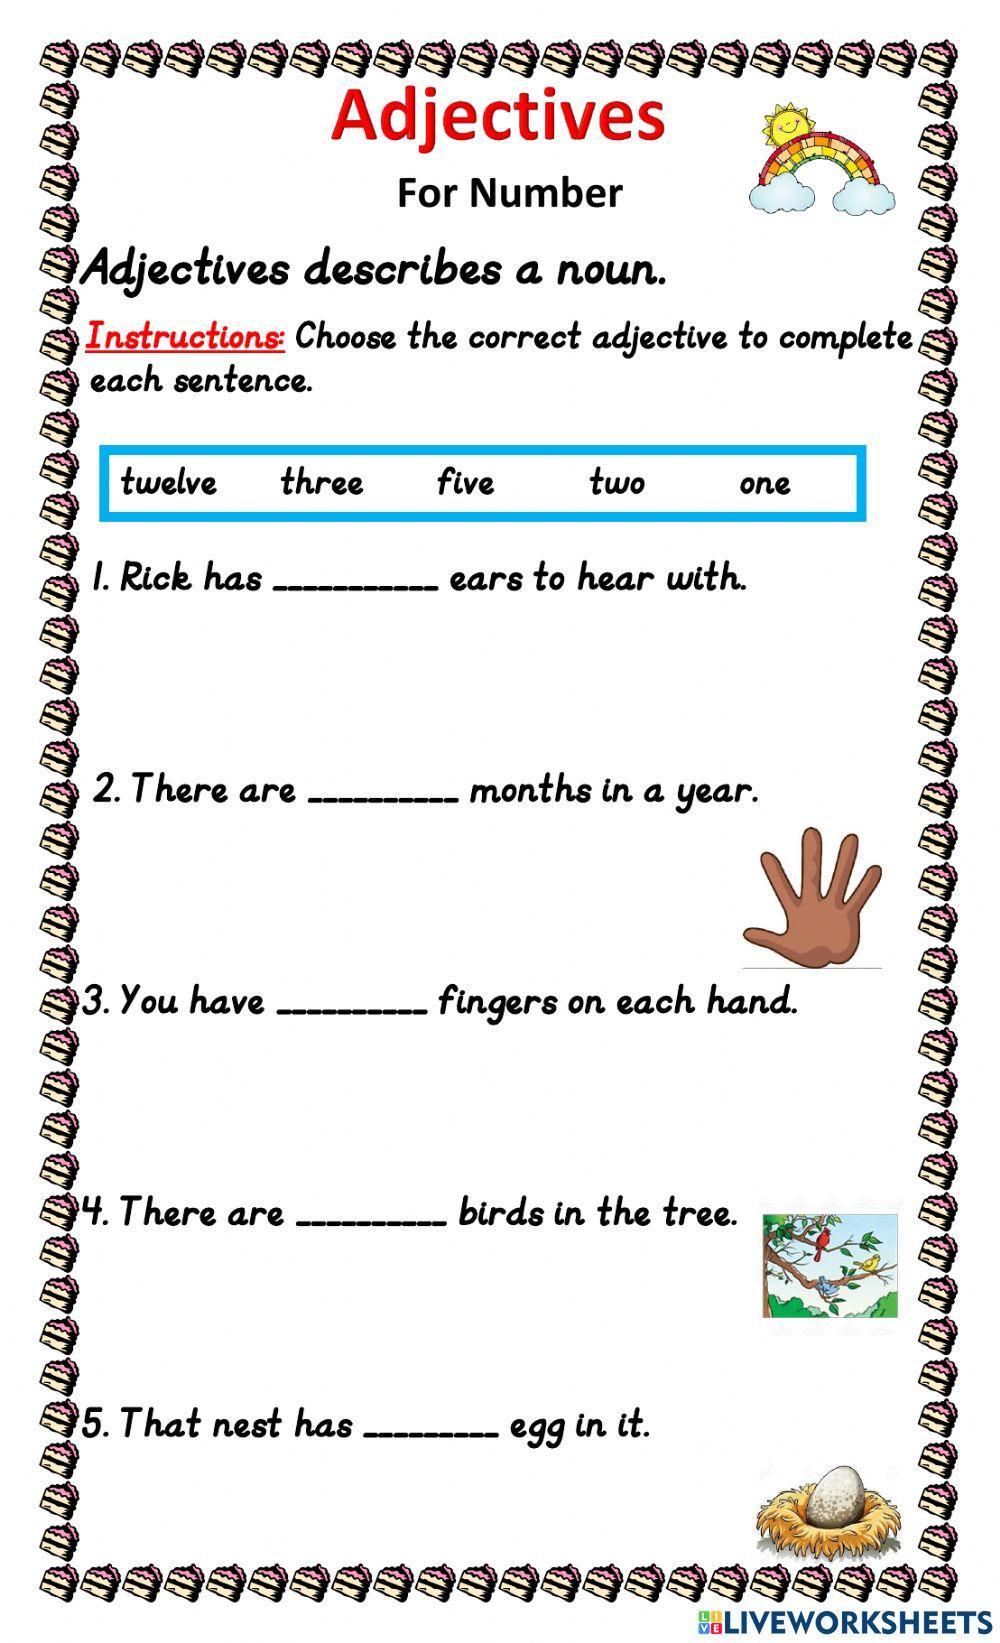 Adjectives for number